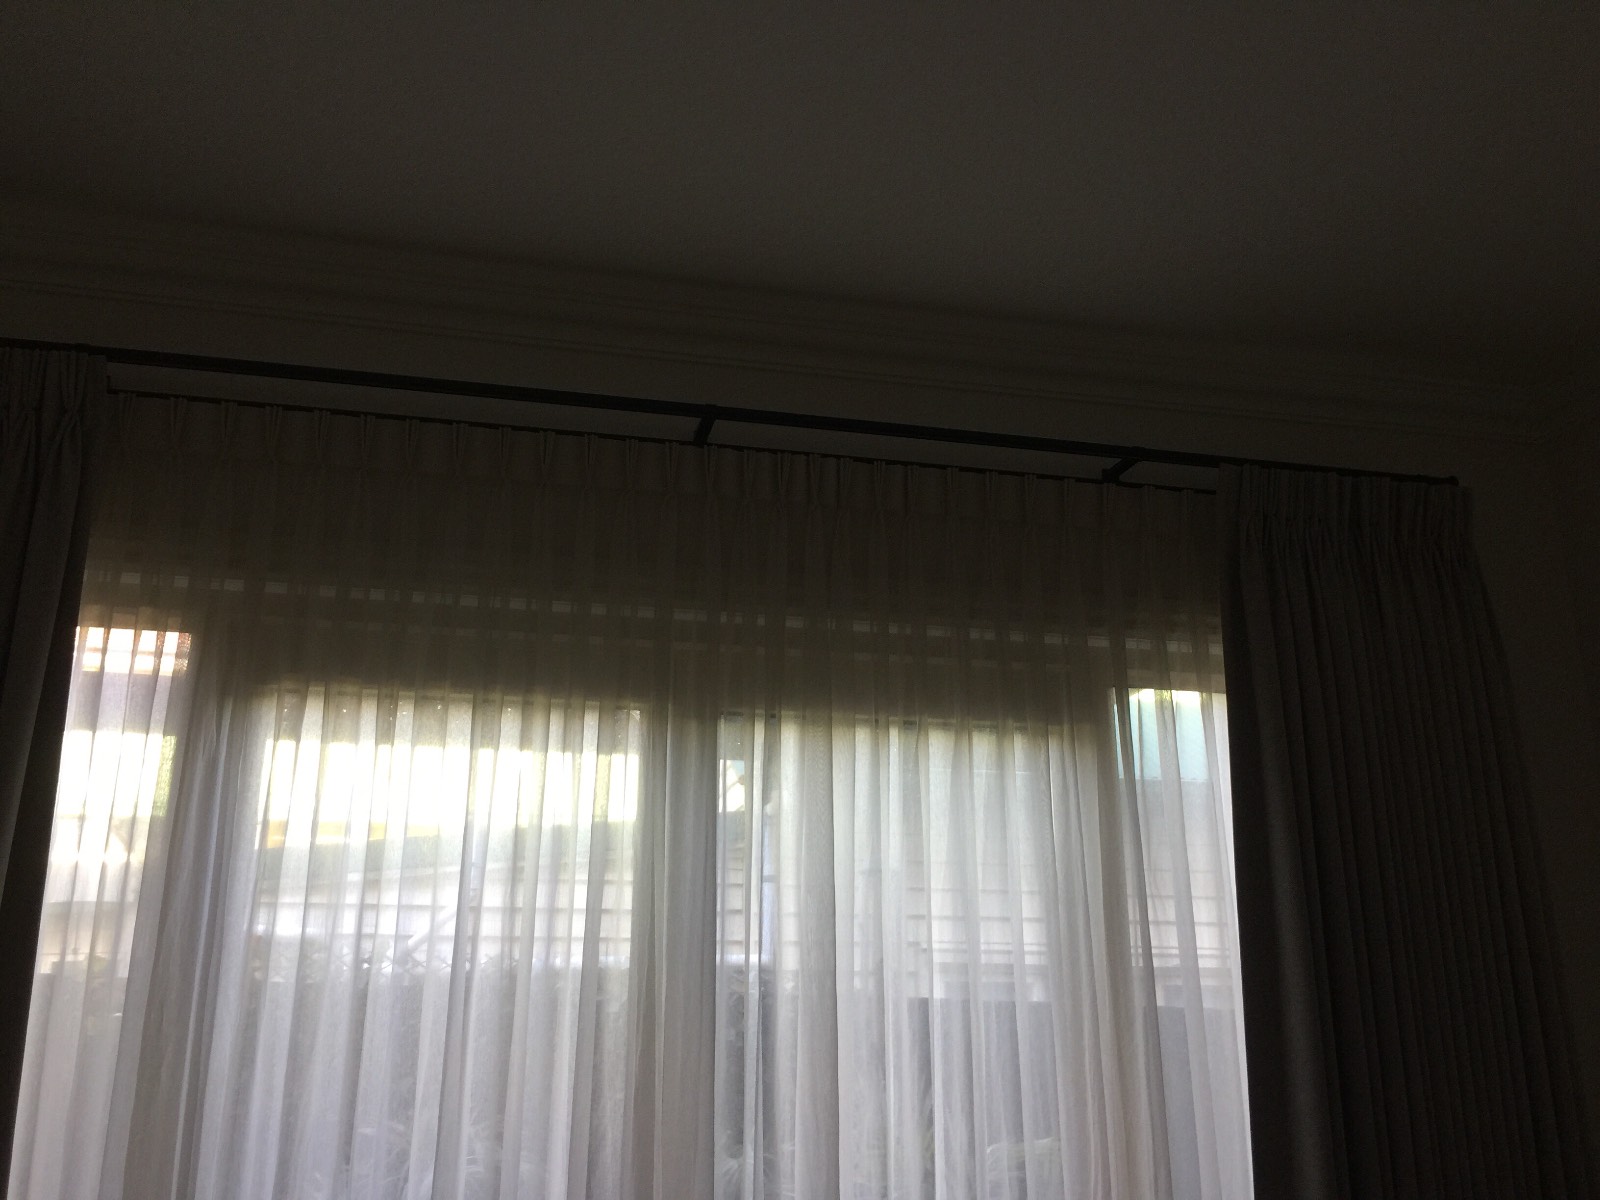 Where to fit curtain rod?